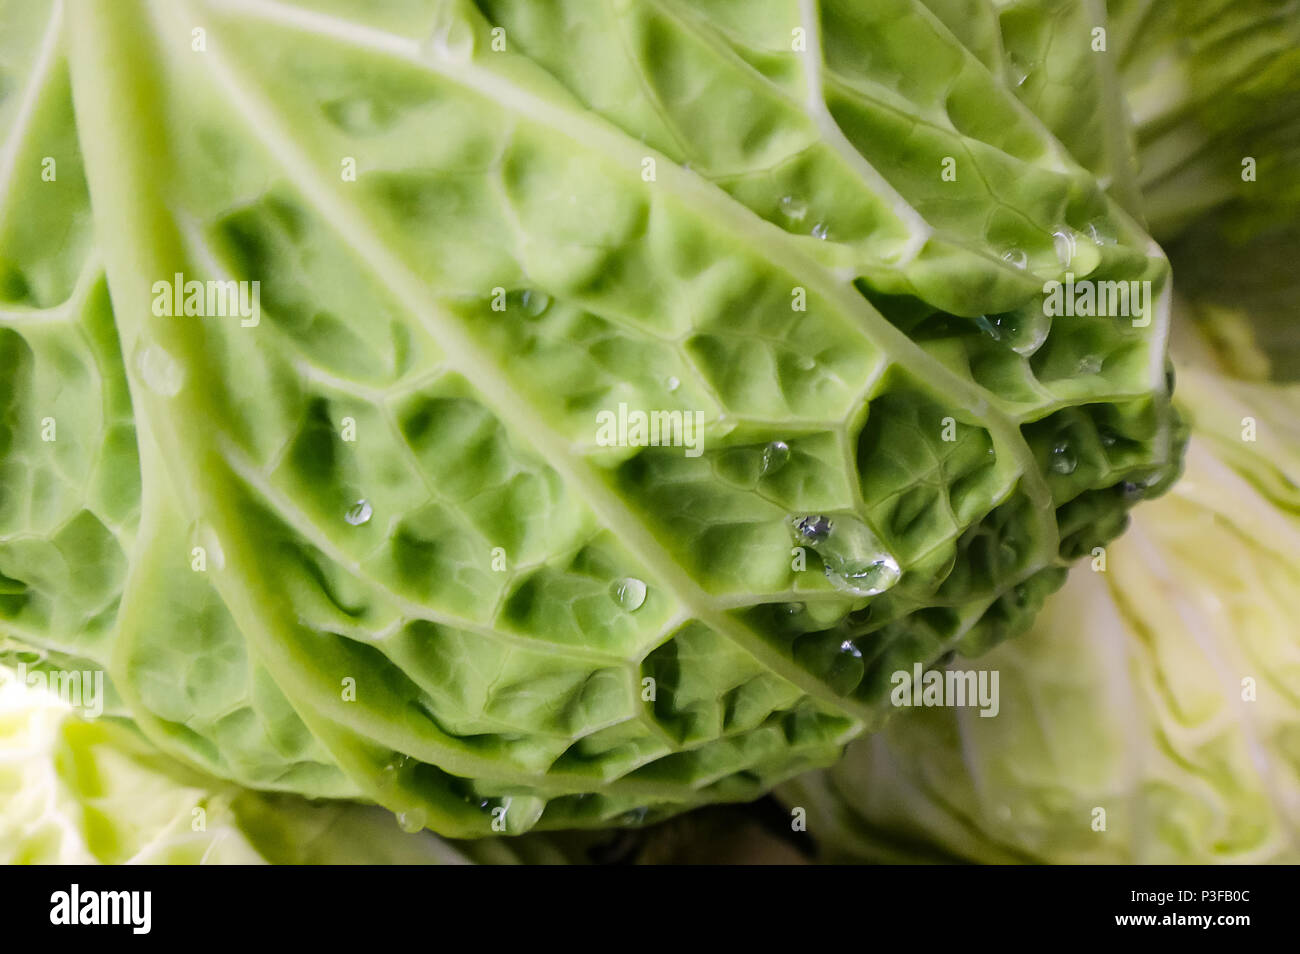 Close-up of fresh green Chinese cabbage with water droplets at the Farmer's Market Stock Photo